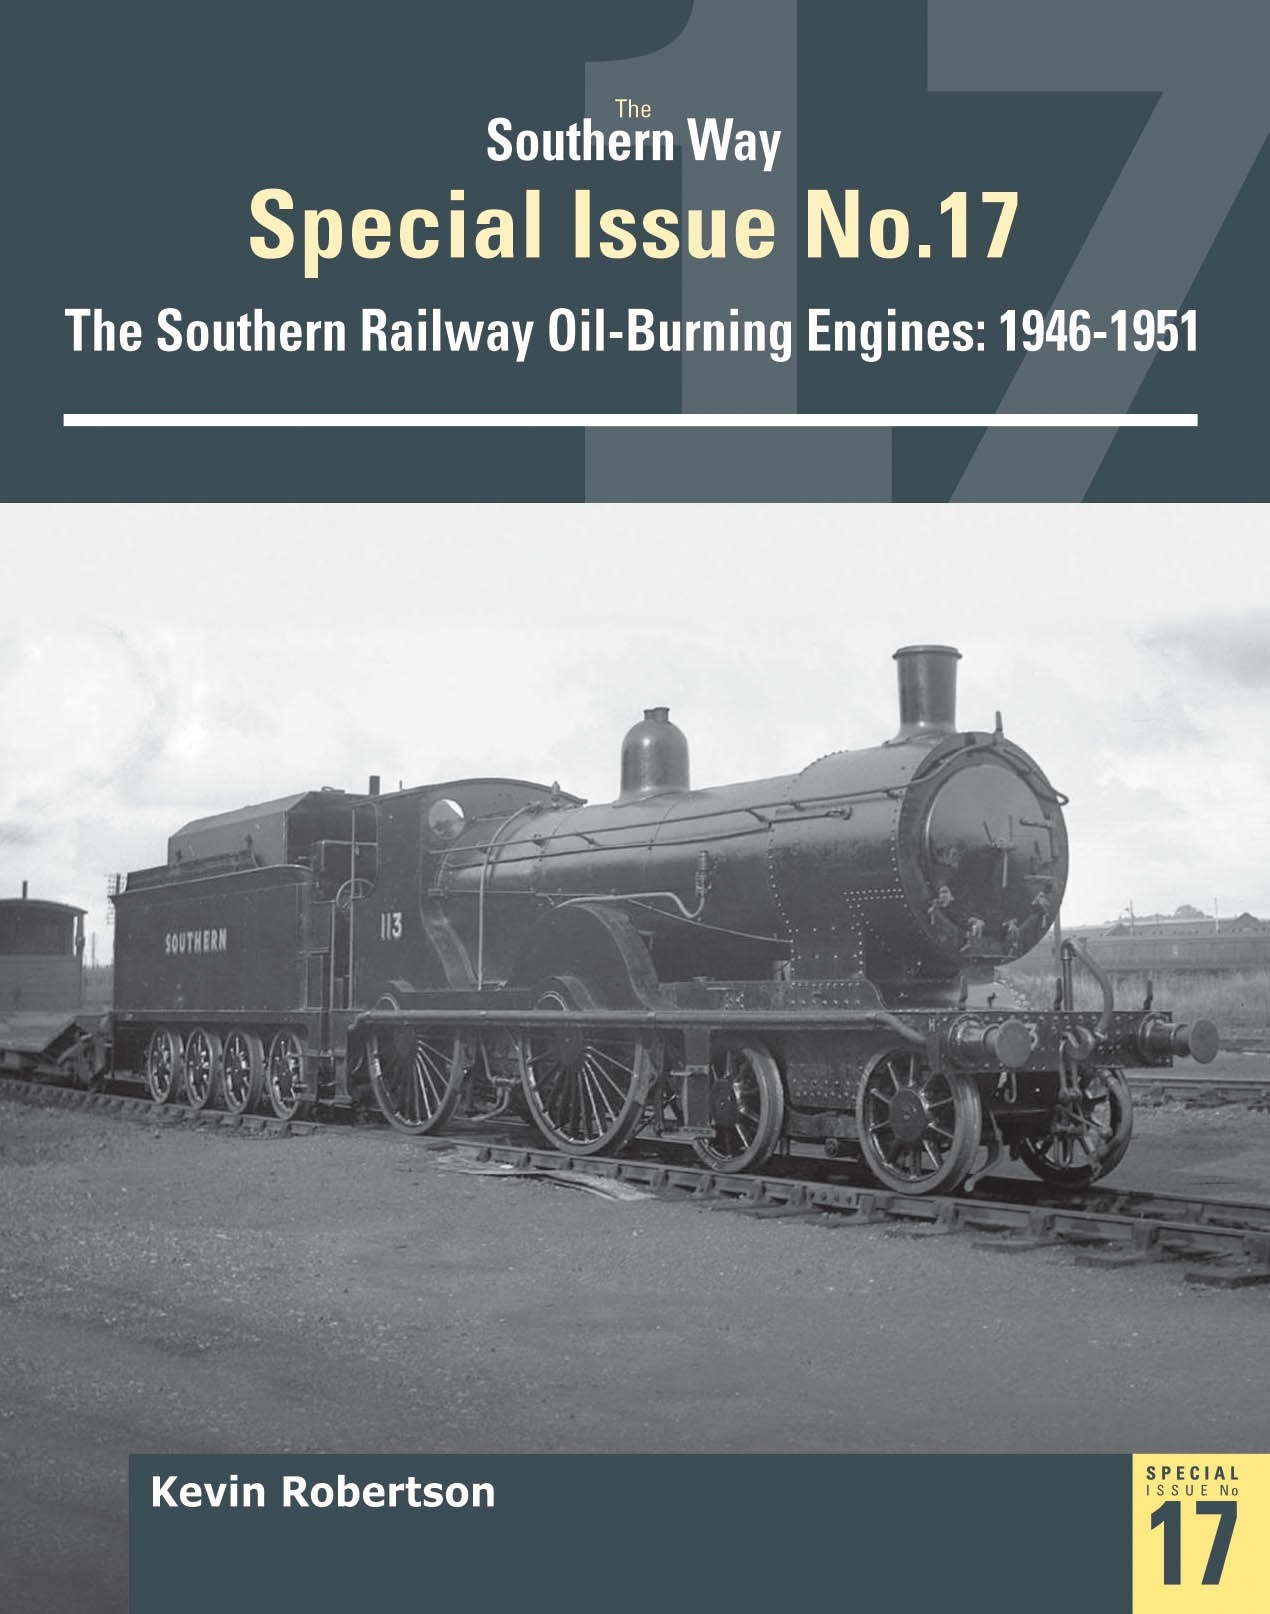 The Southern Way Special Issue No 17